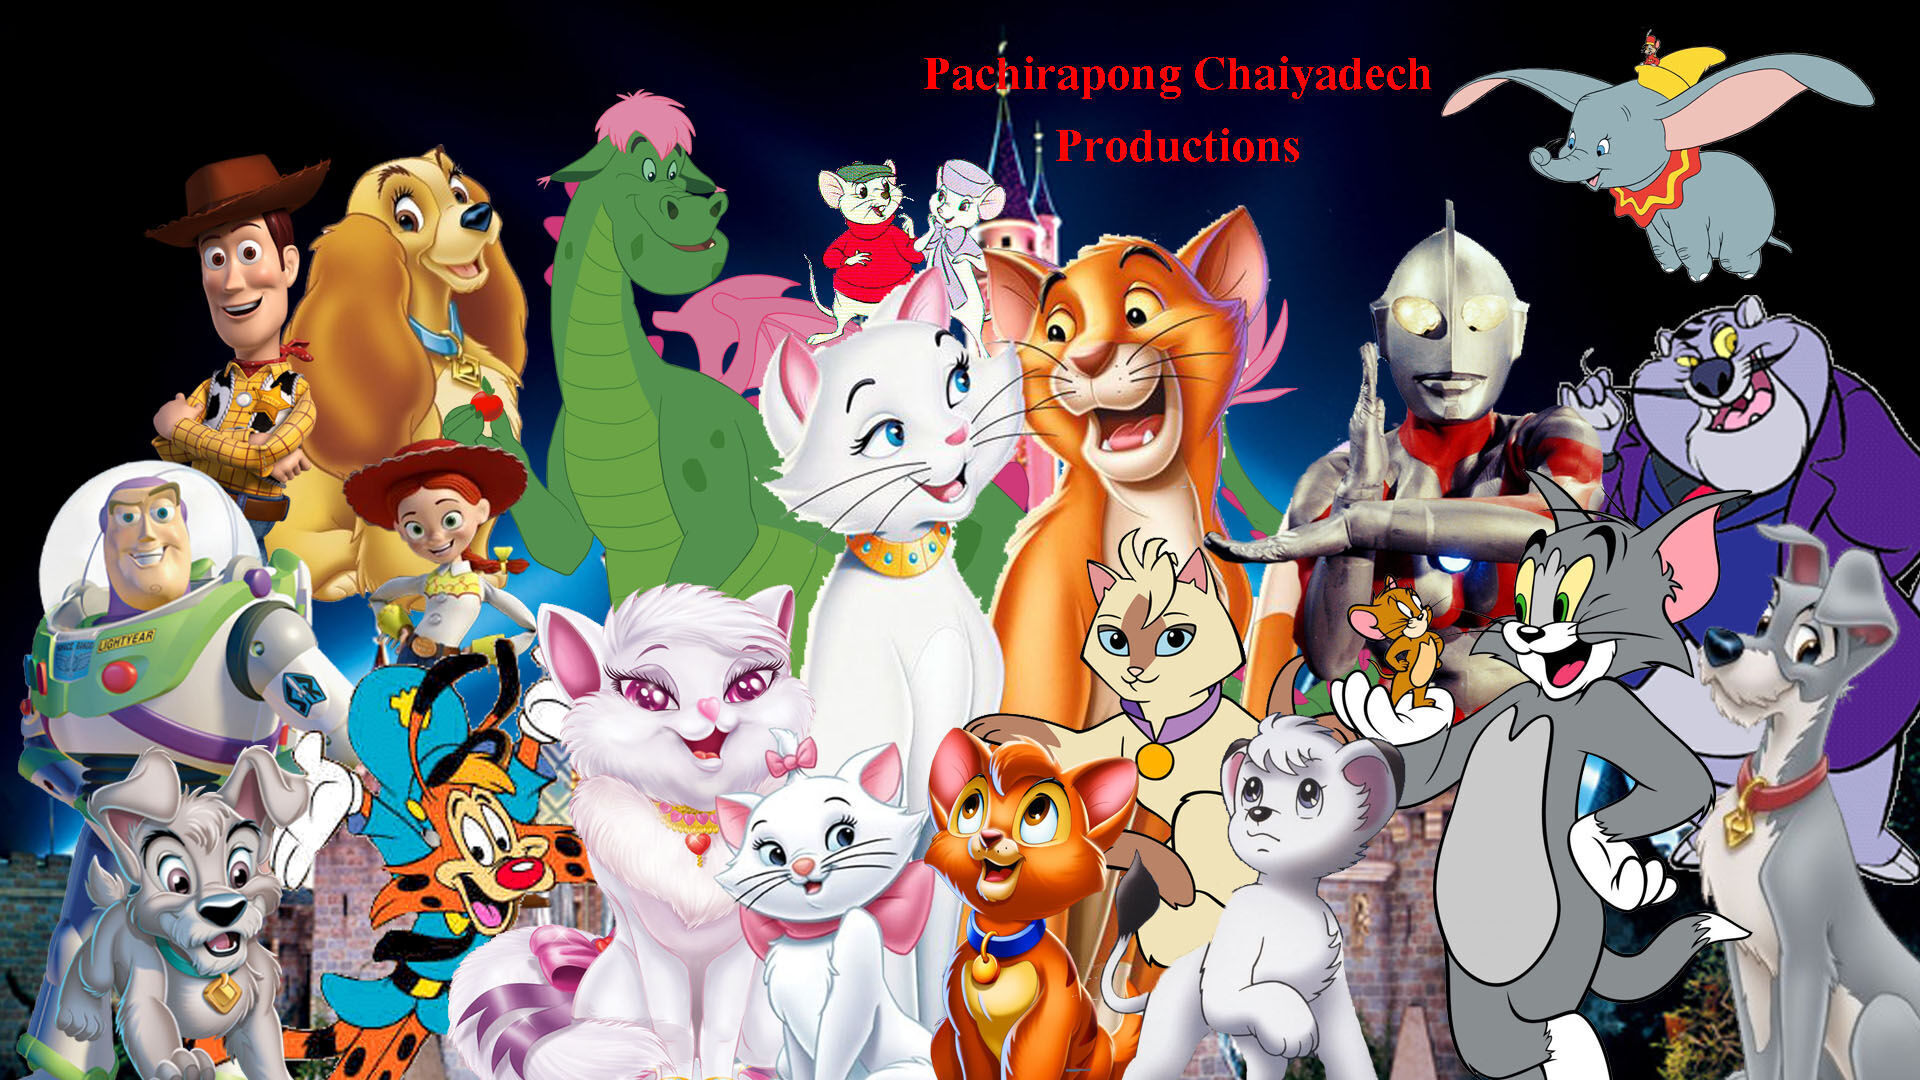 Twilight White and the Seven  Characters, Pachirapong Wiki